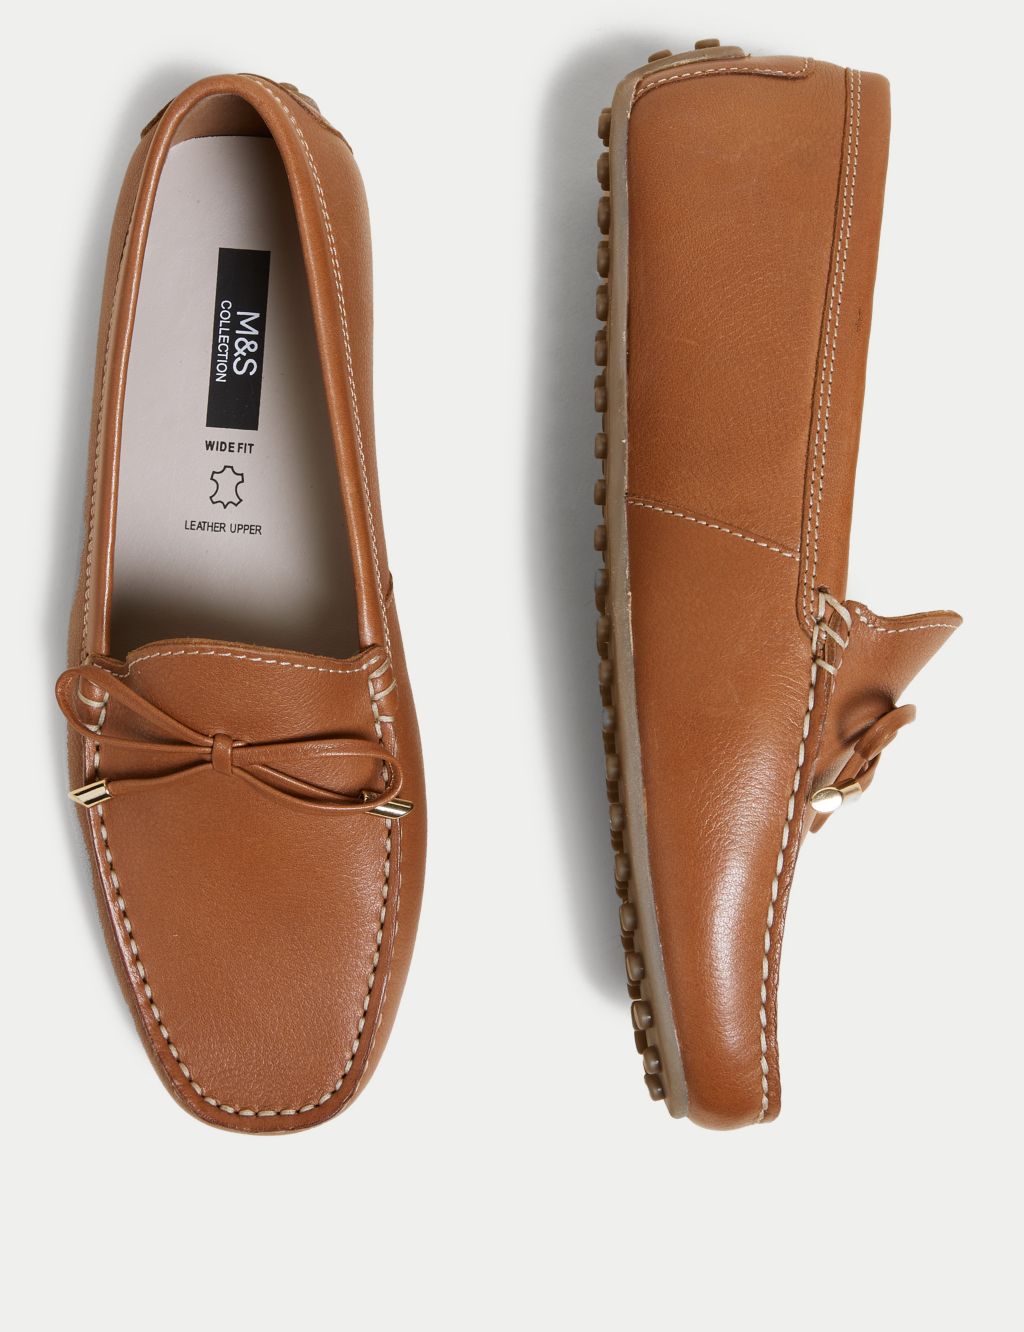 Wide Fit Leather Bow Boat Shoes image 2